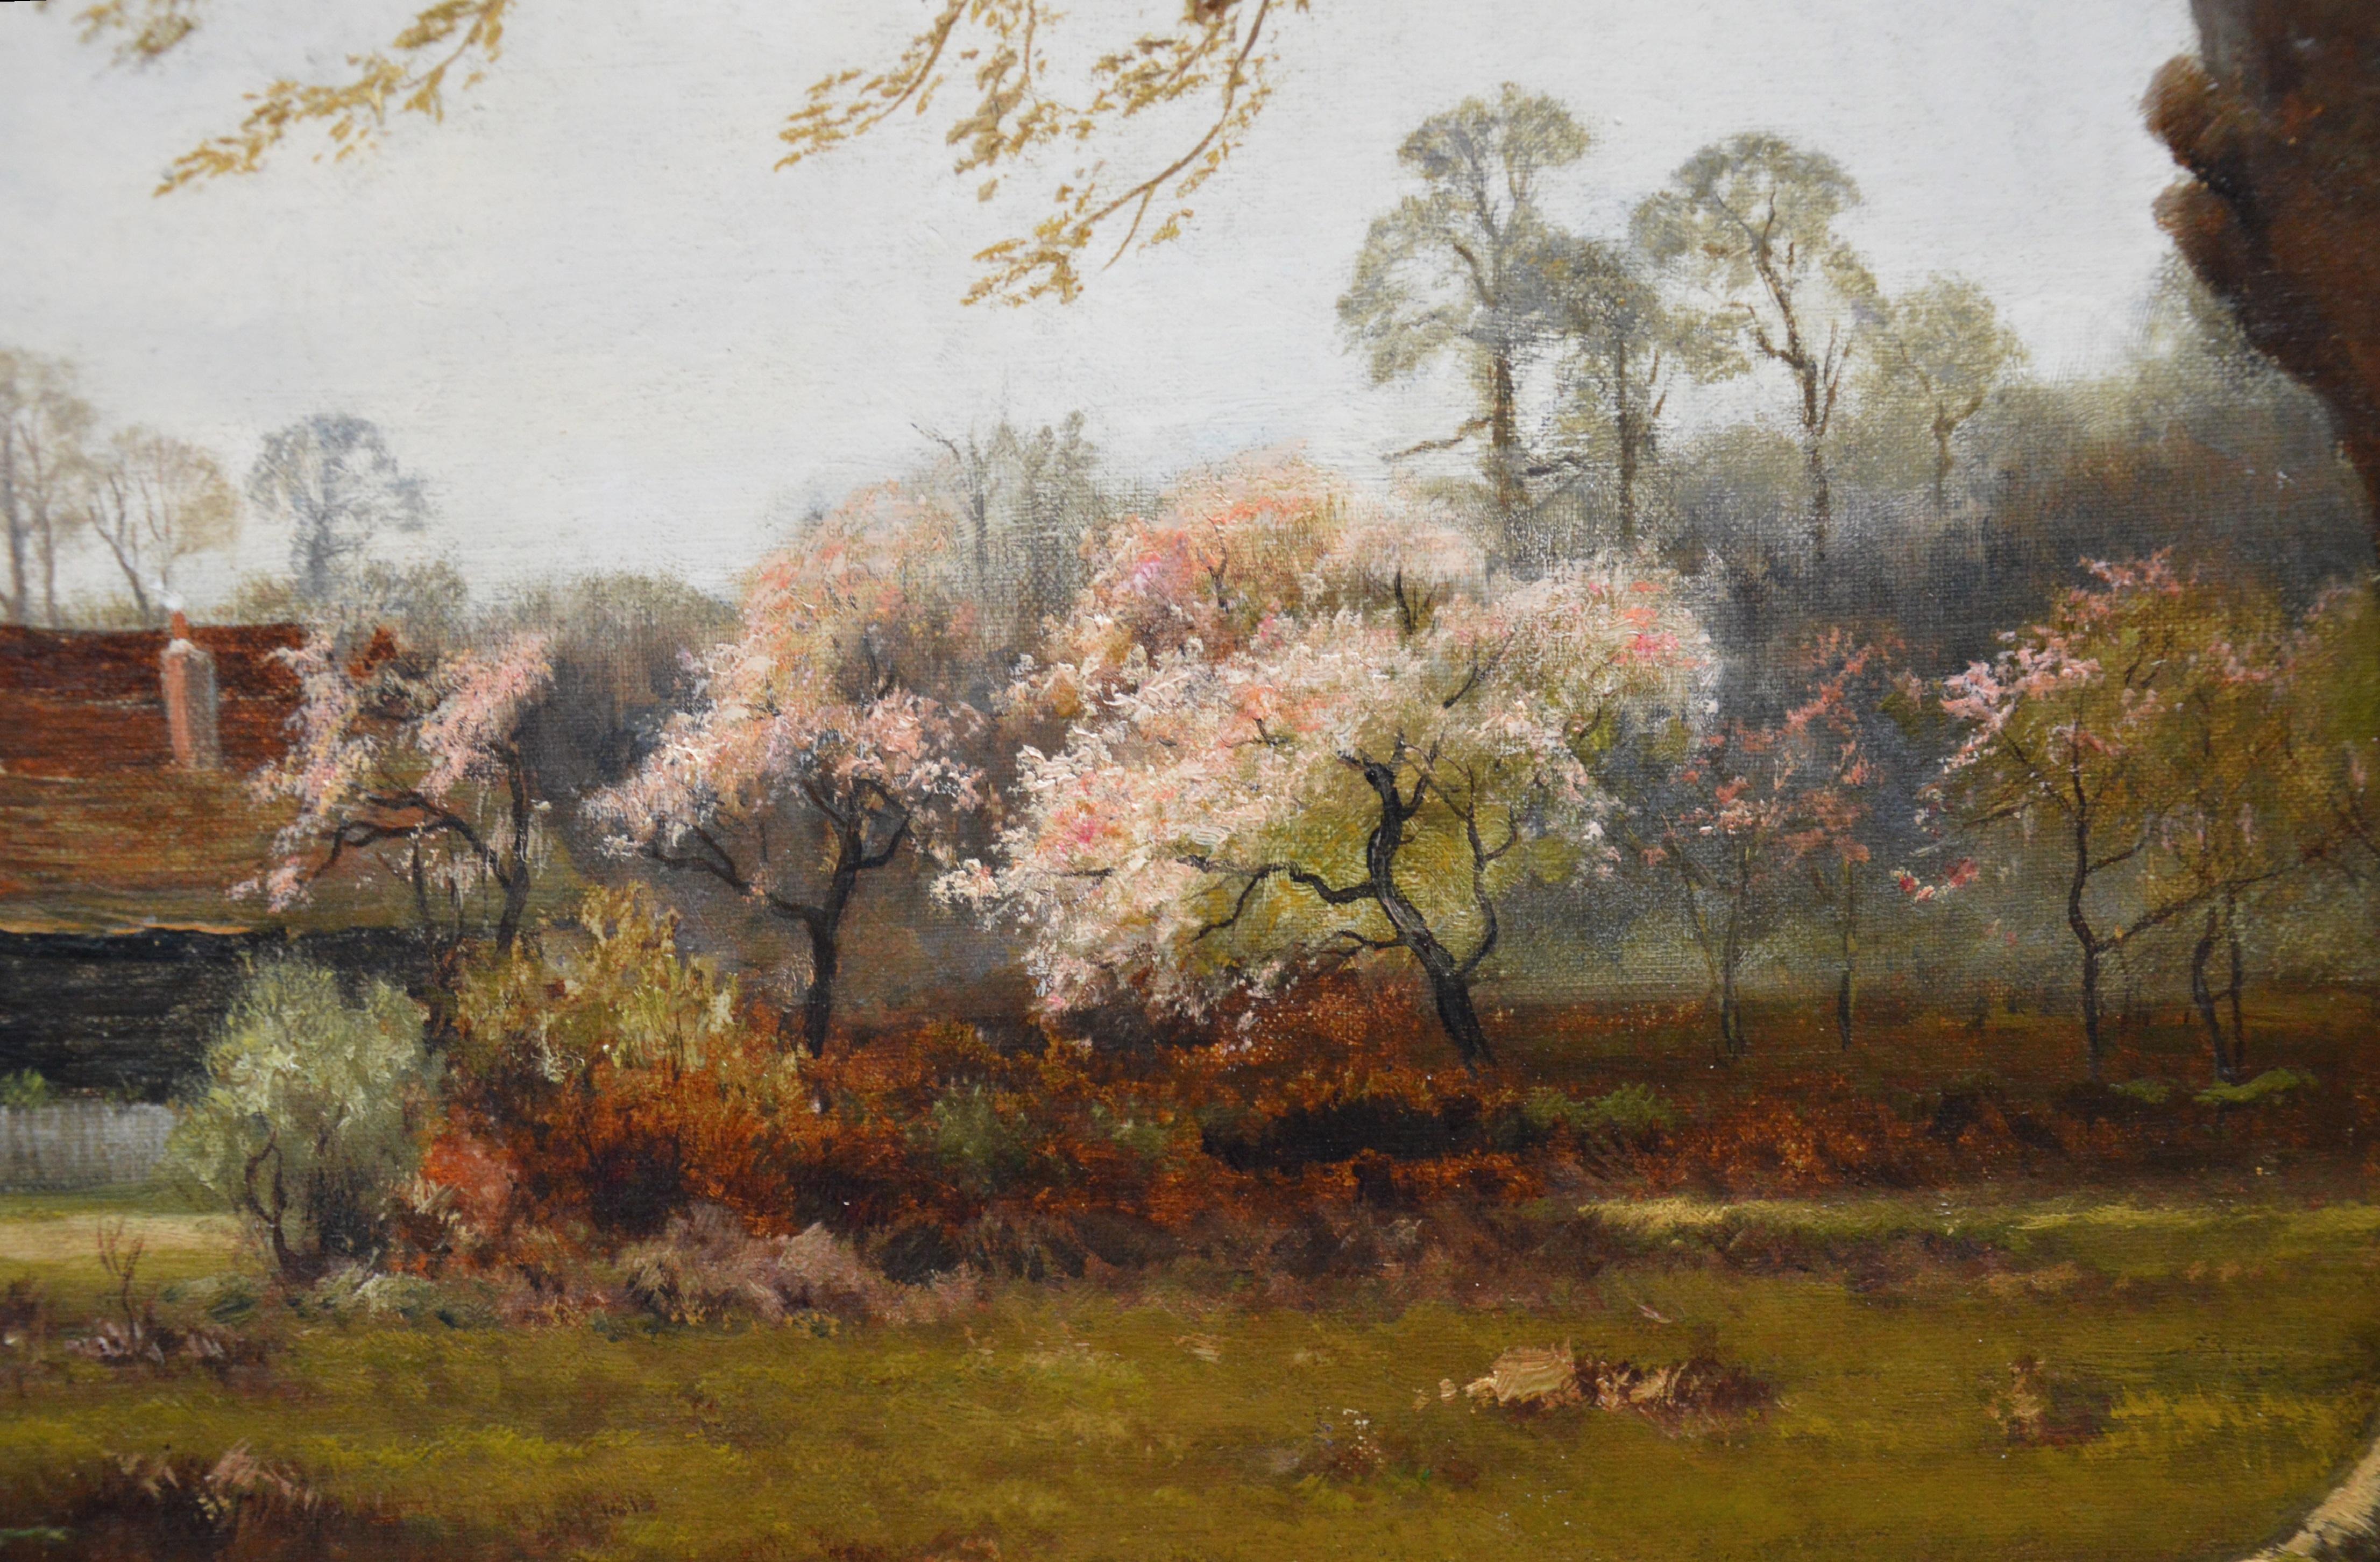 This is a very large fine 19th century oil on canvas depicting sheep grazing in open fields before ‘A Berkshire Homestead’ in springtime by the eminent Victorian landscape painter Alfred de Bréanski Snr. (1852-1928). The painting is signed by the